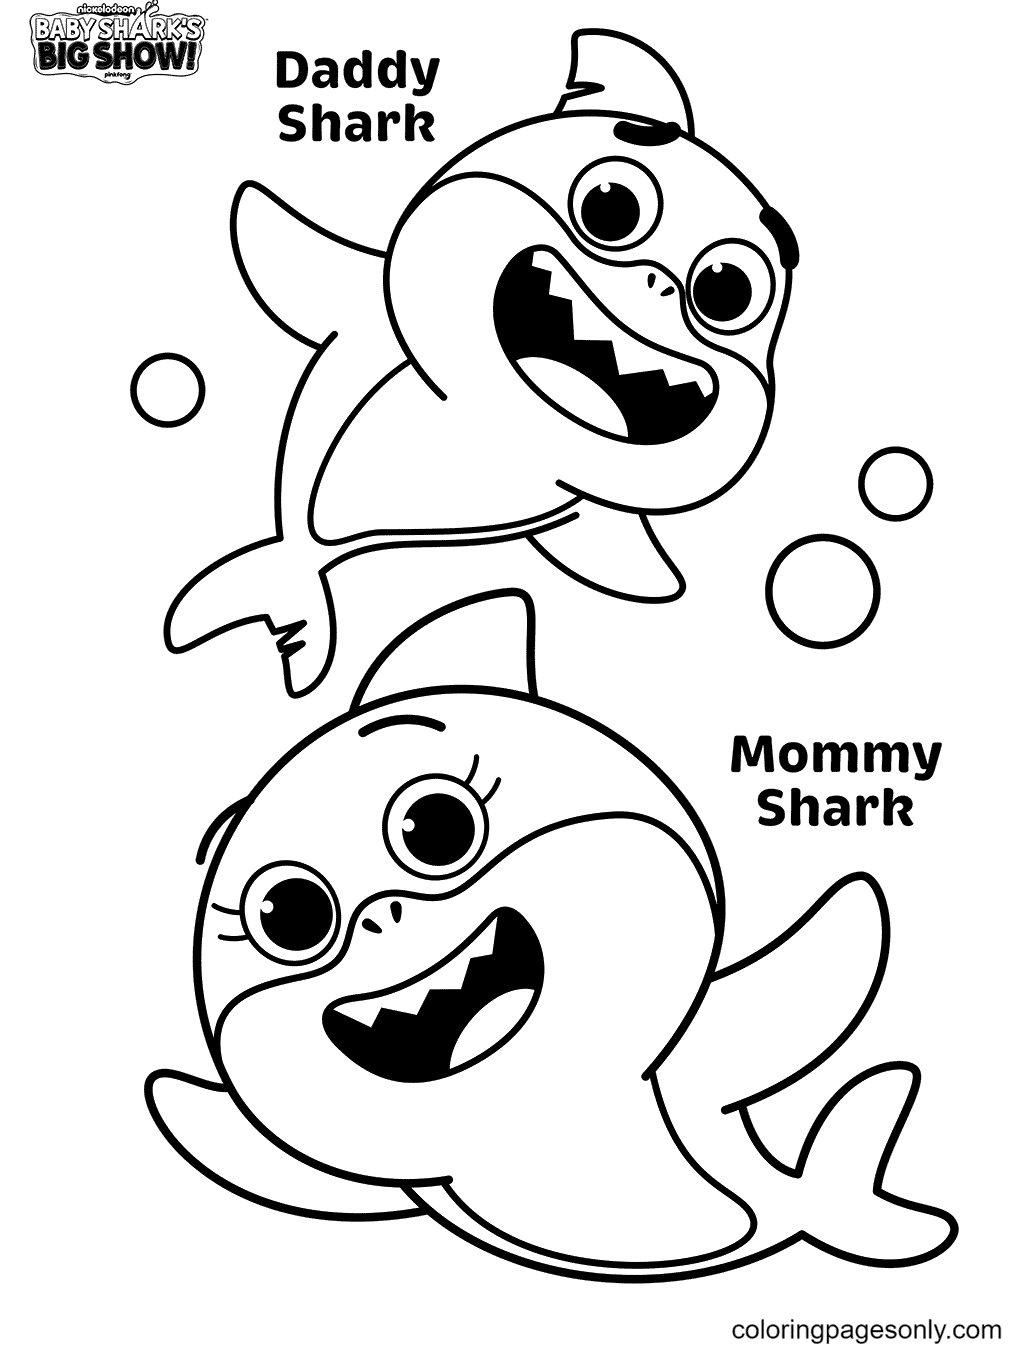 Daddy Shark and Mommy Shark Coloring Pages   Baby Shark Coloring ...